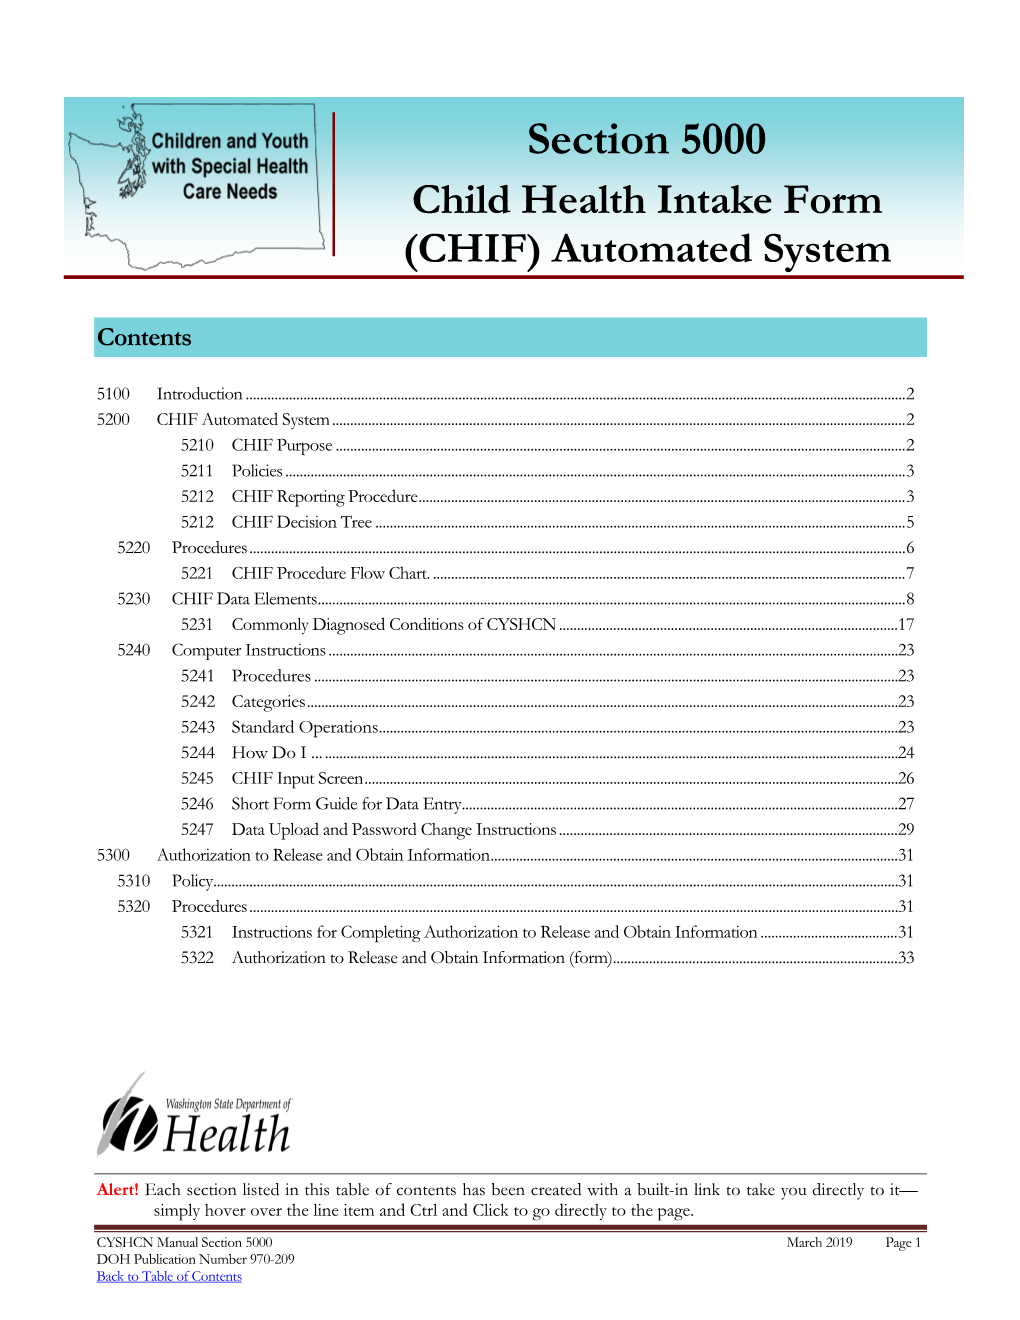 Section 5000 – Child Health Intake Form (CHIF) Automated System